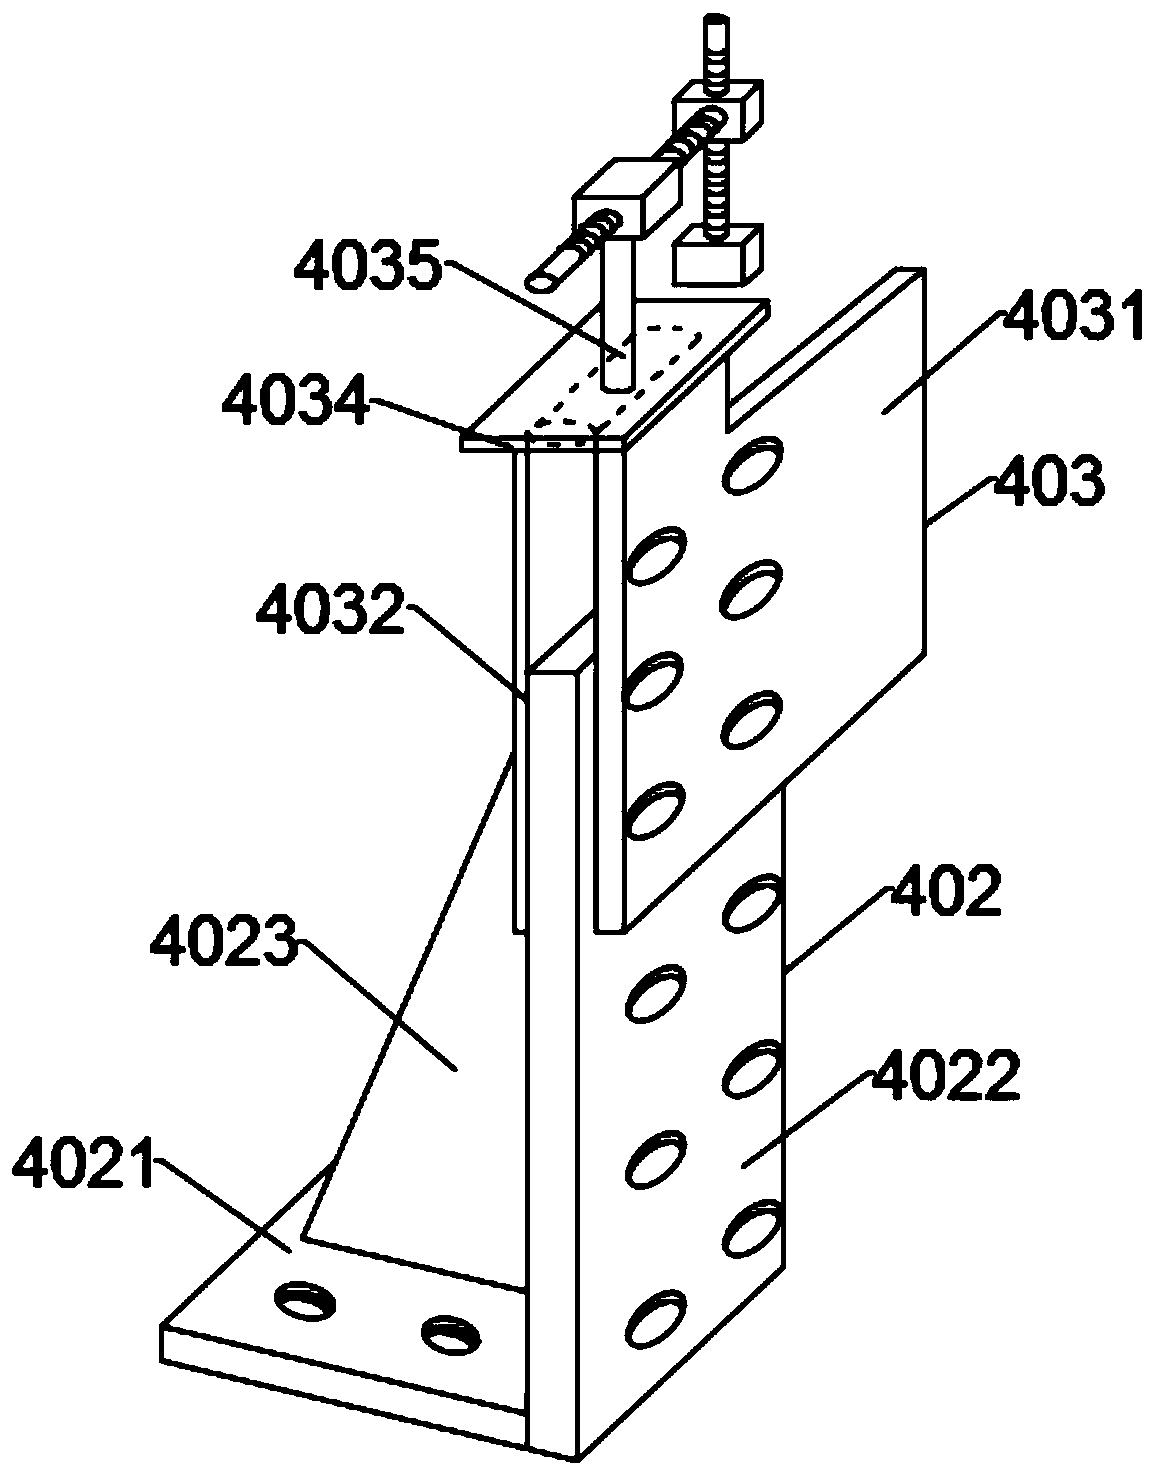 A three-dimensional positioning tool for welding assembly of automobile floor